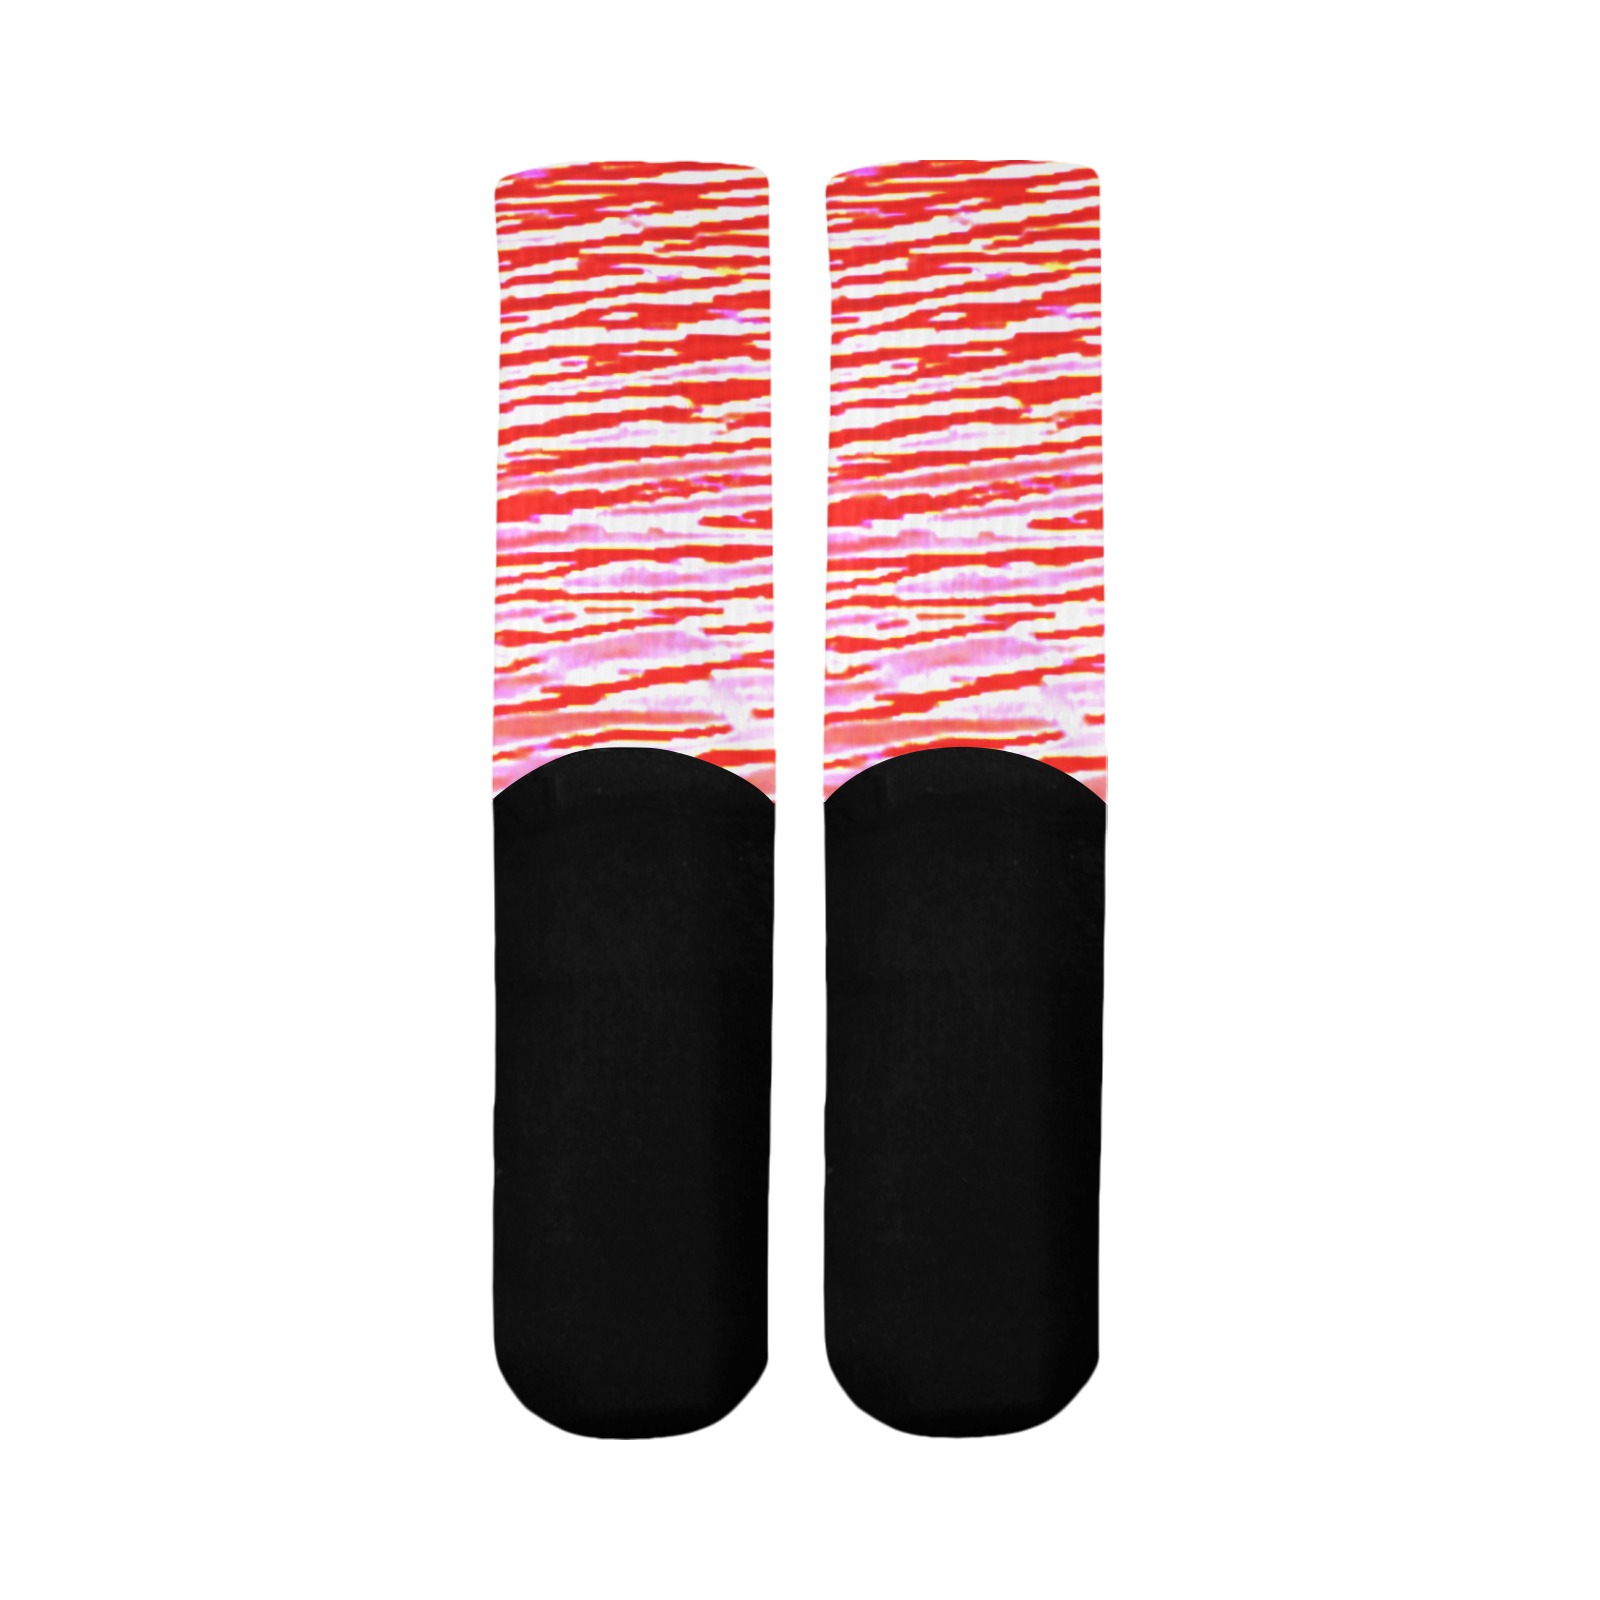 Orange and red water Mid-Calf Socks (Black Sole)